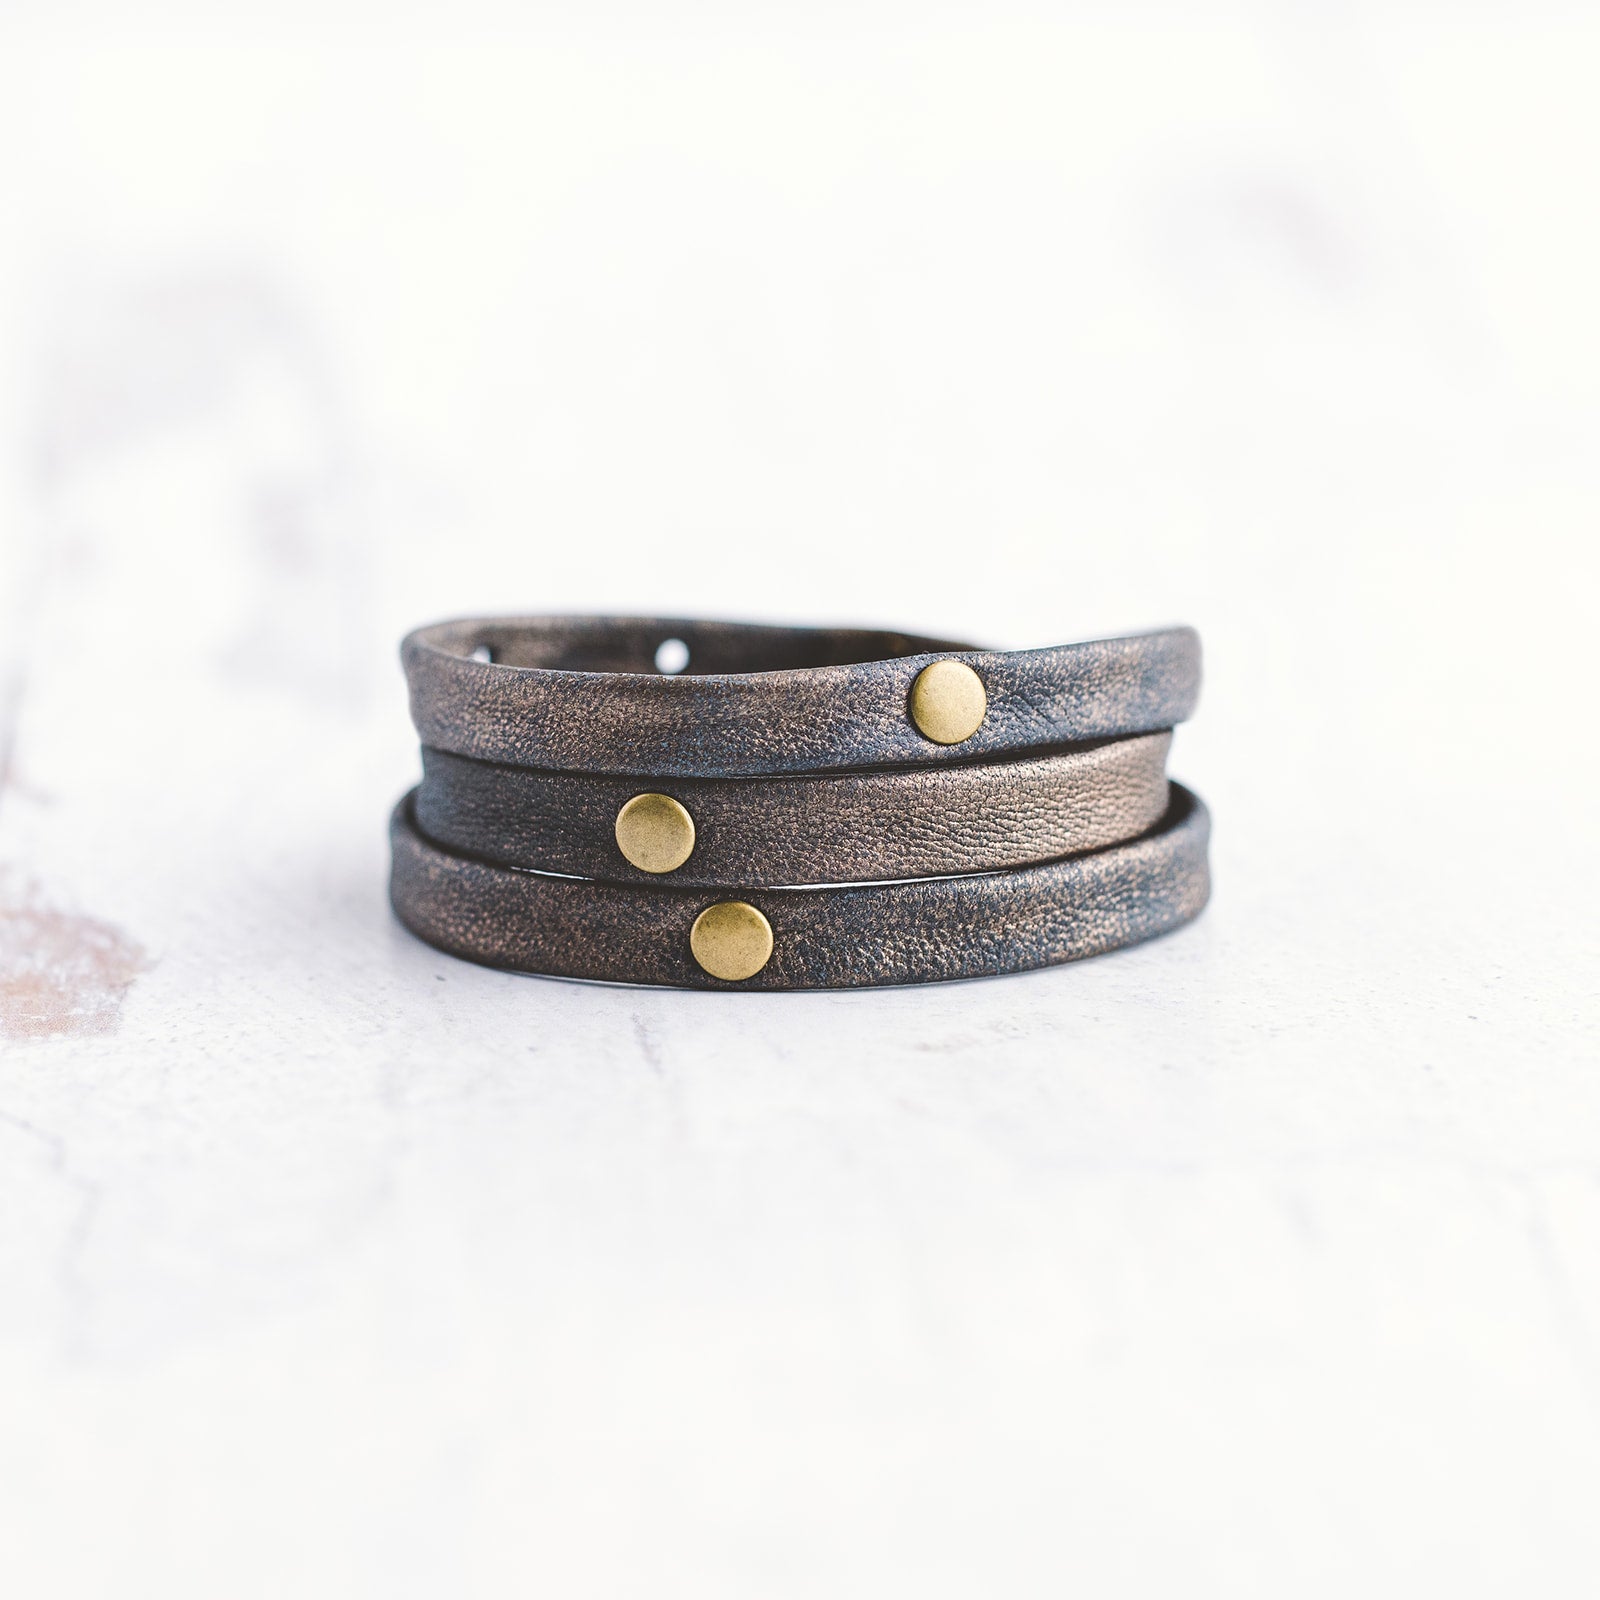 Triple Wrap Leather Bracelet with Brass Ring